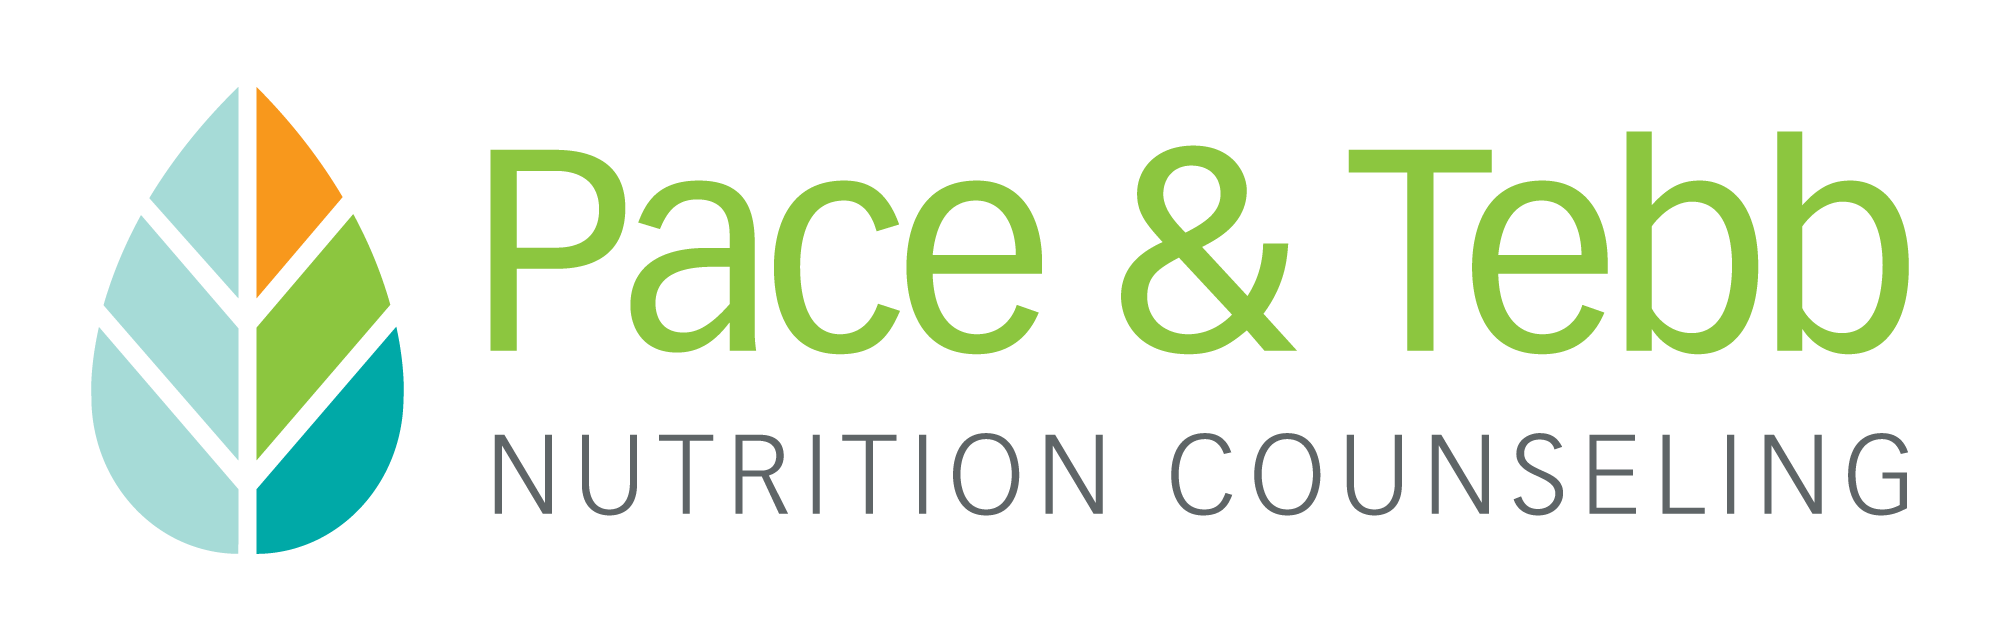 Pace & Tebb Nutrition Counseling Logo